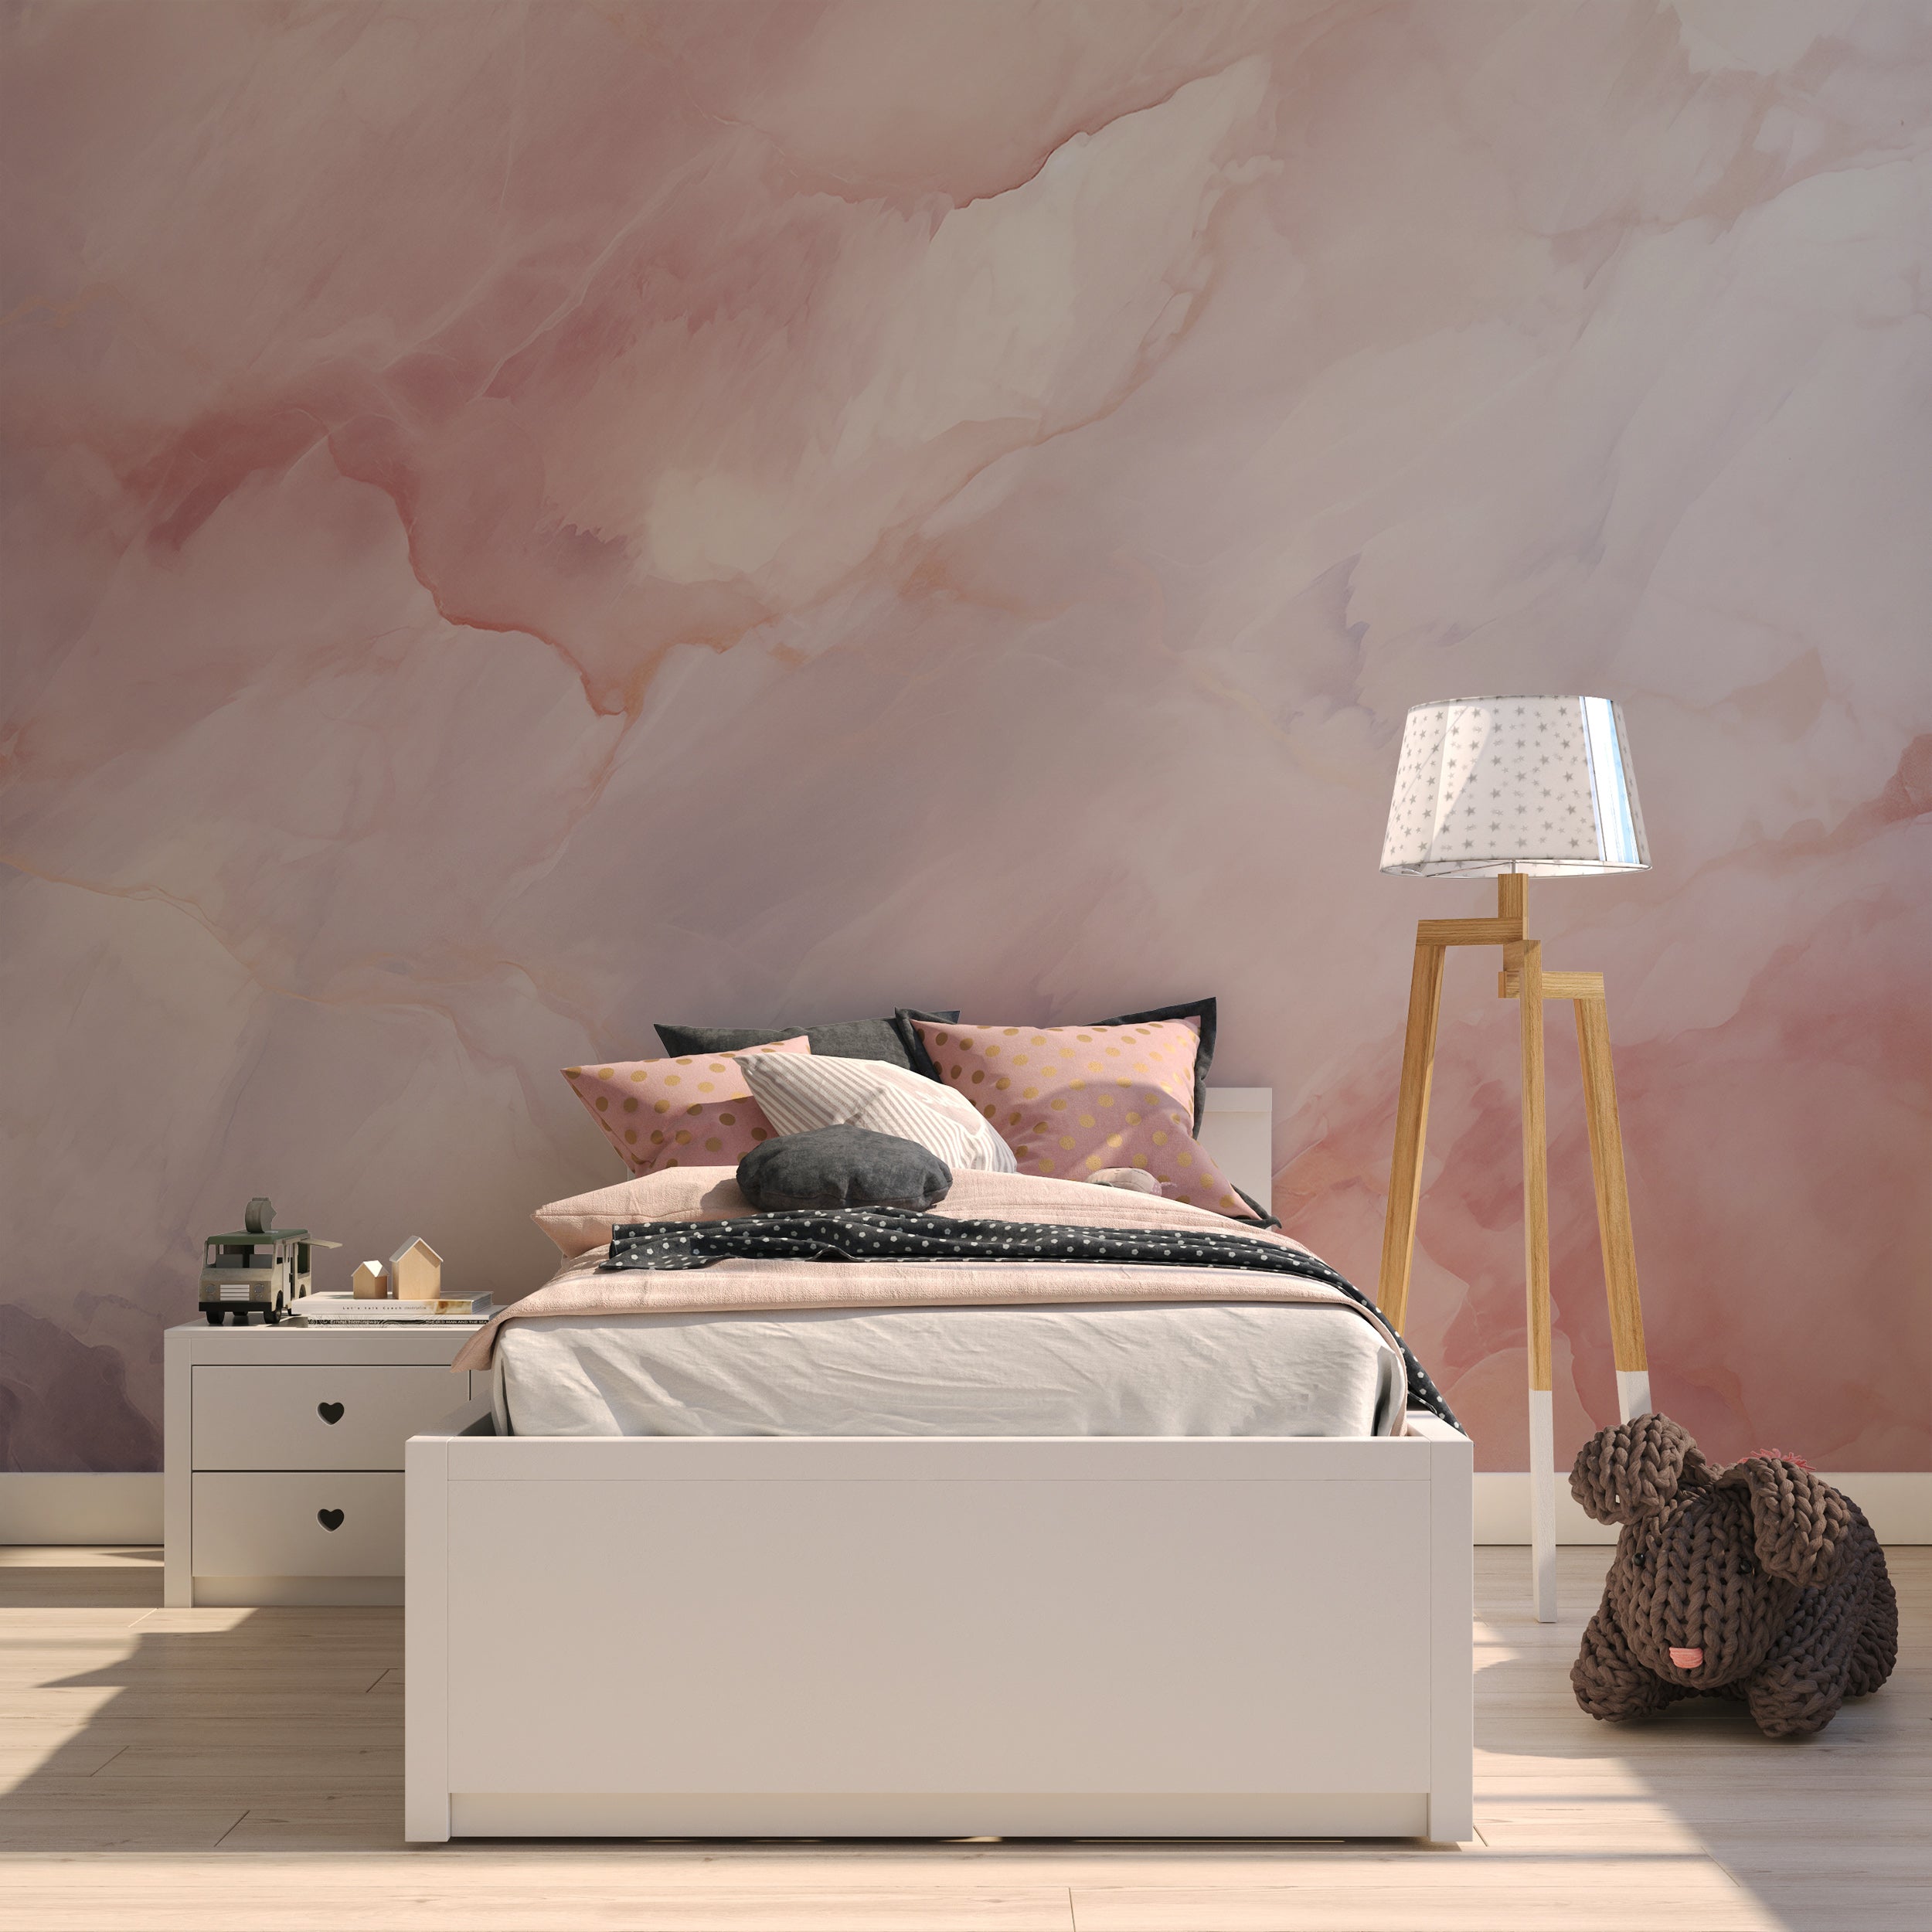 Removable Stone Wall Decal with Subtle Pink Tones